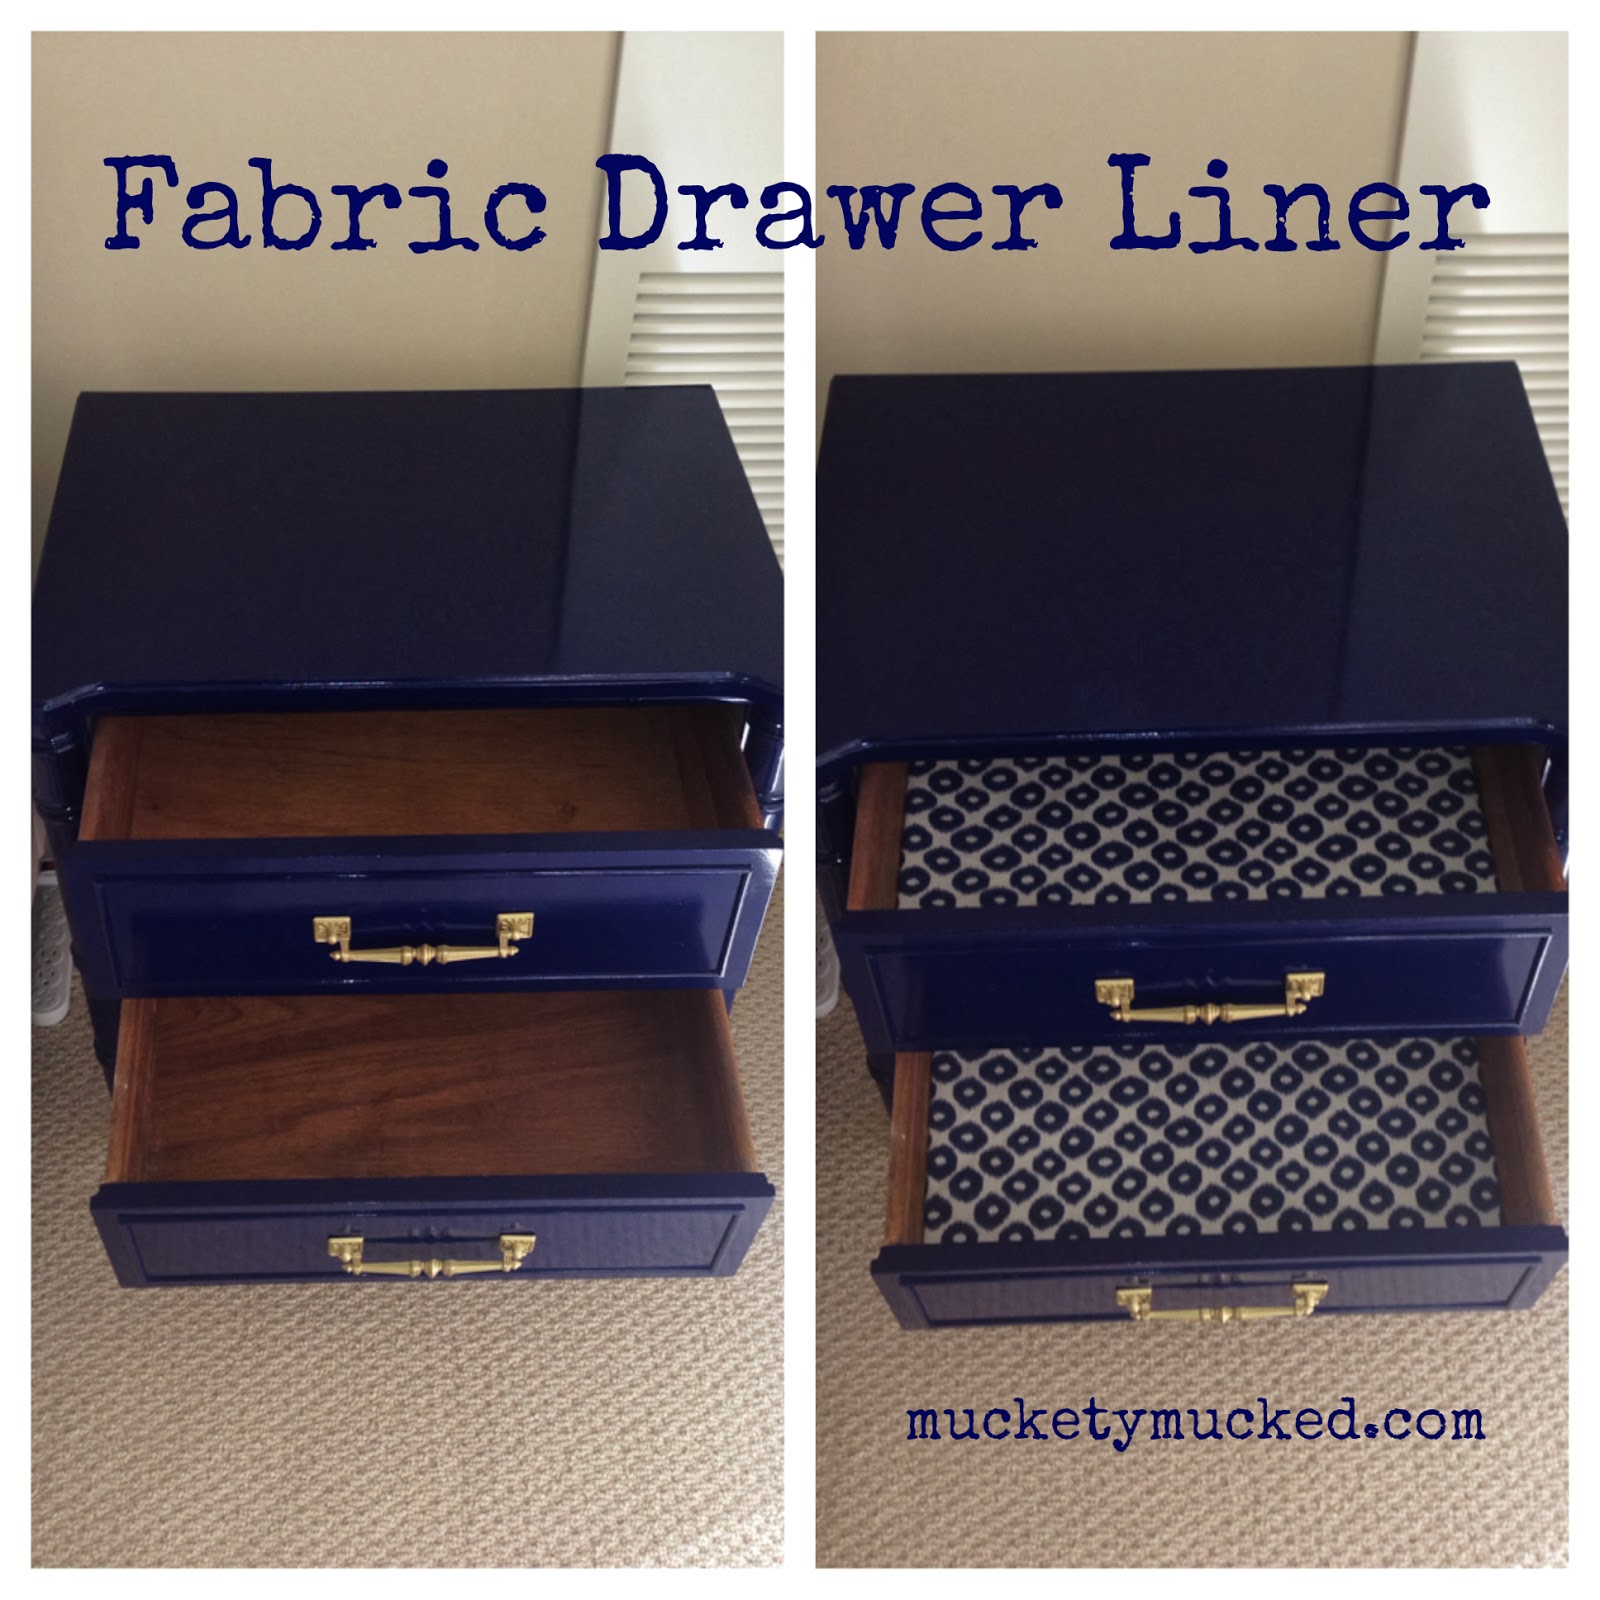 Muckety Mucked: Craft fail & recovery. Lining drawers with fabric, twice.